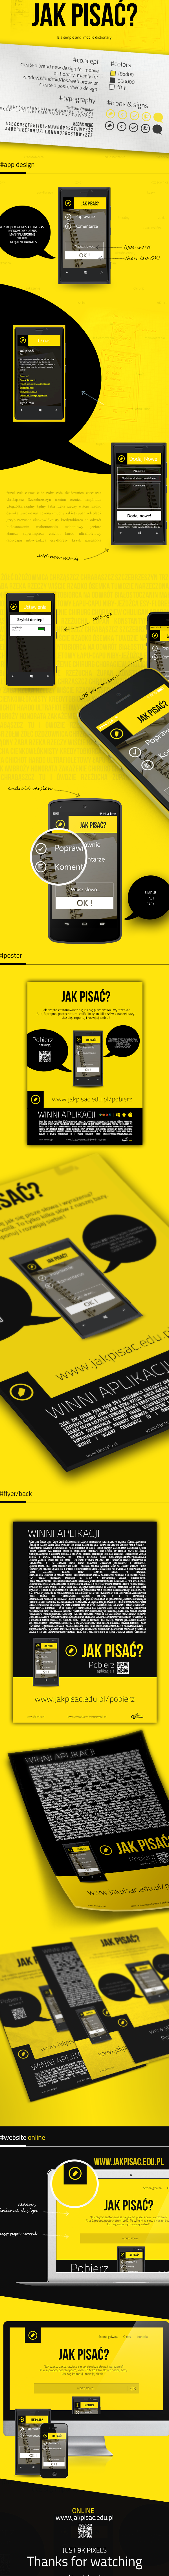 yellow One Page Website creative app iphone design iphone mockup jakpisac graphic Webdesign poland www brand